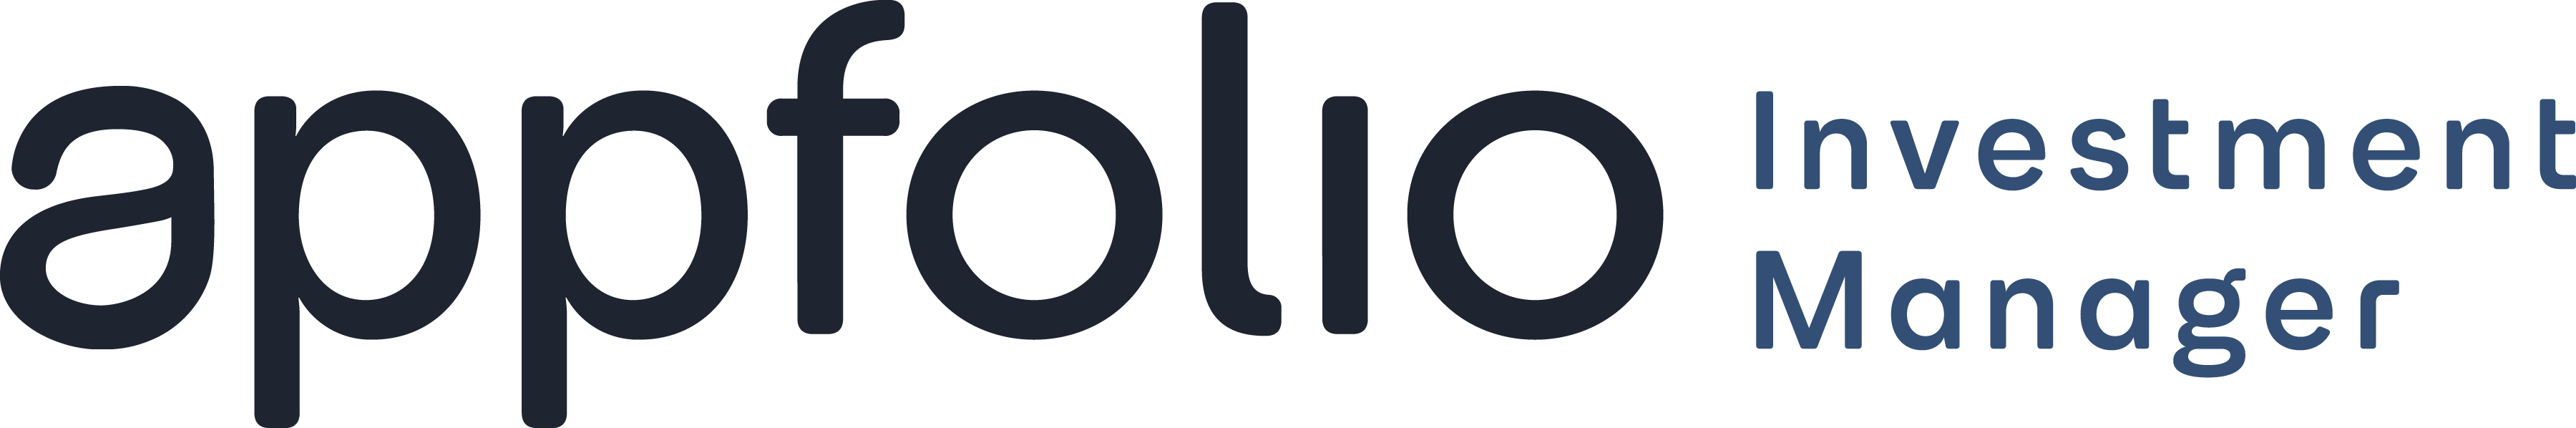 AppFolio-Investment-Manager-Wordmark-Primary.png